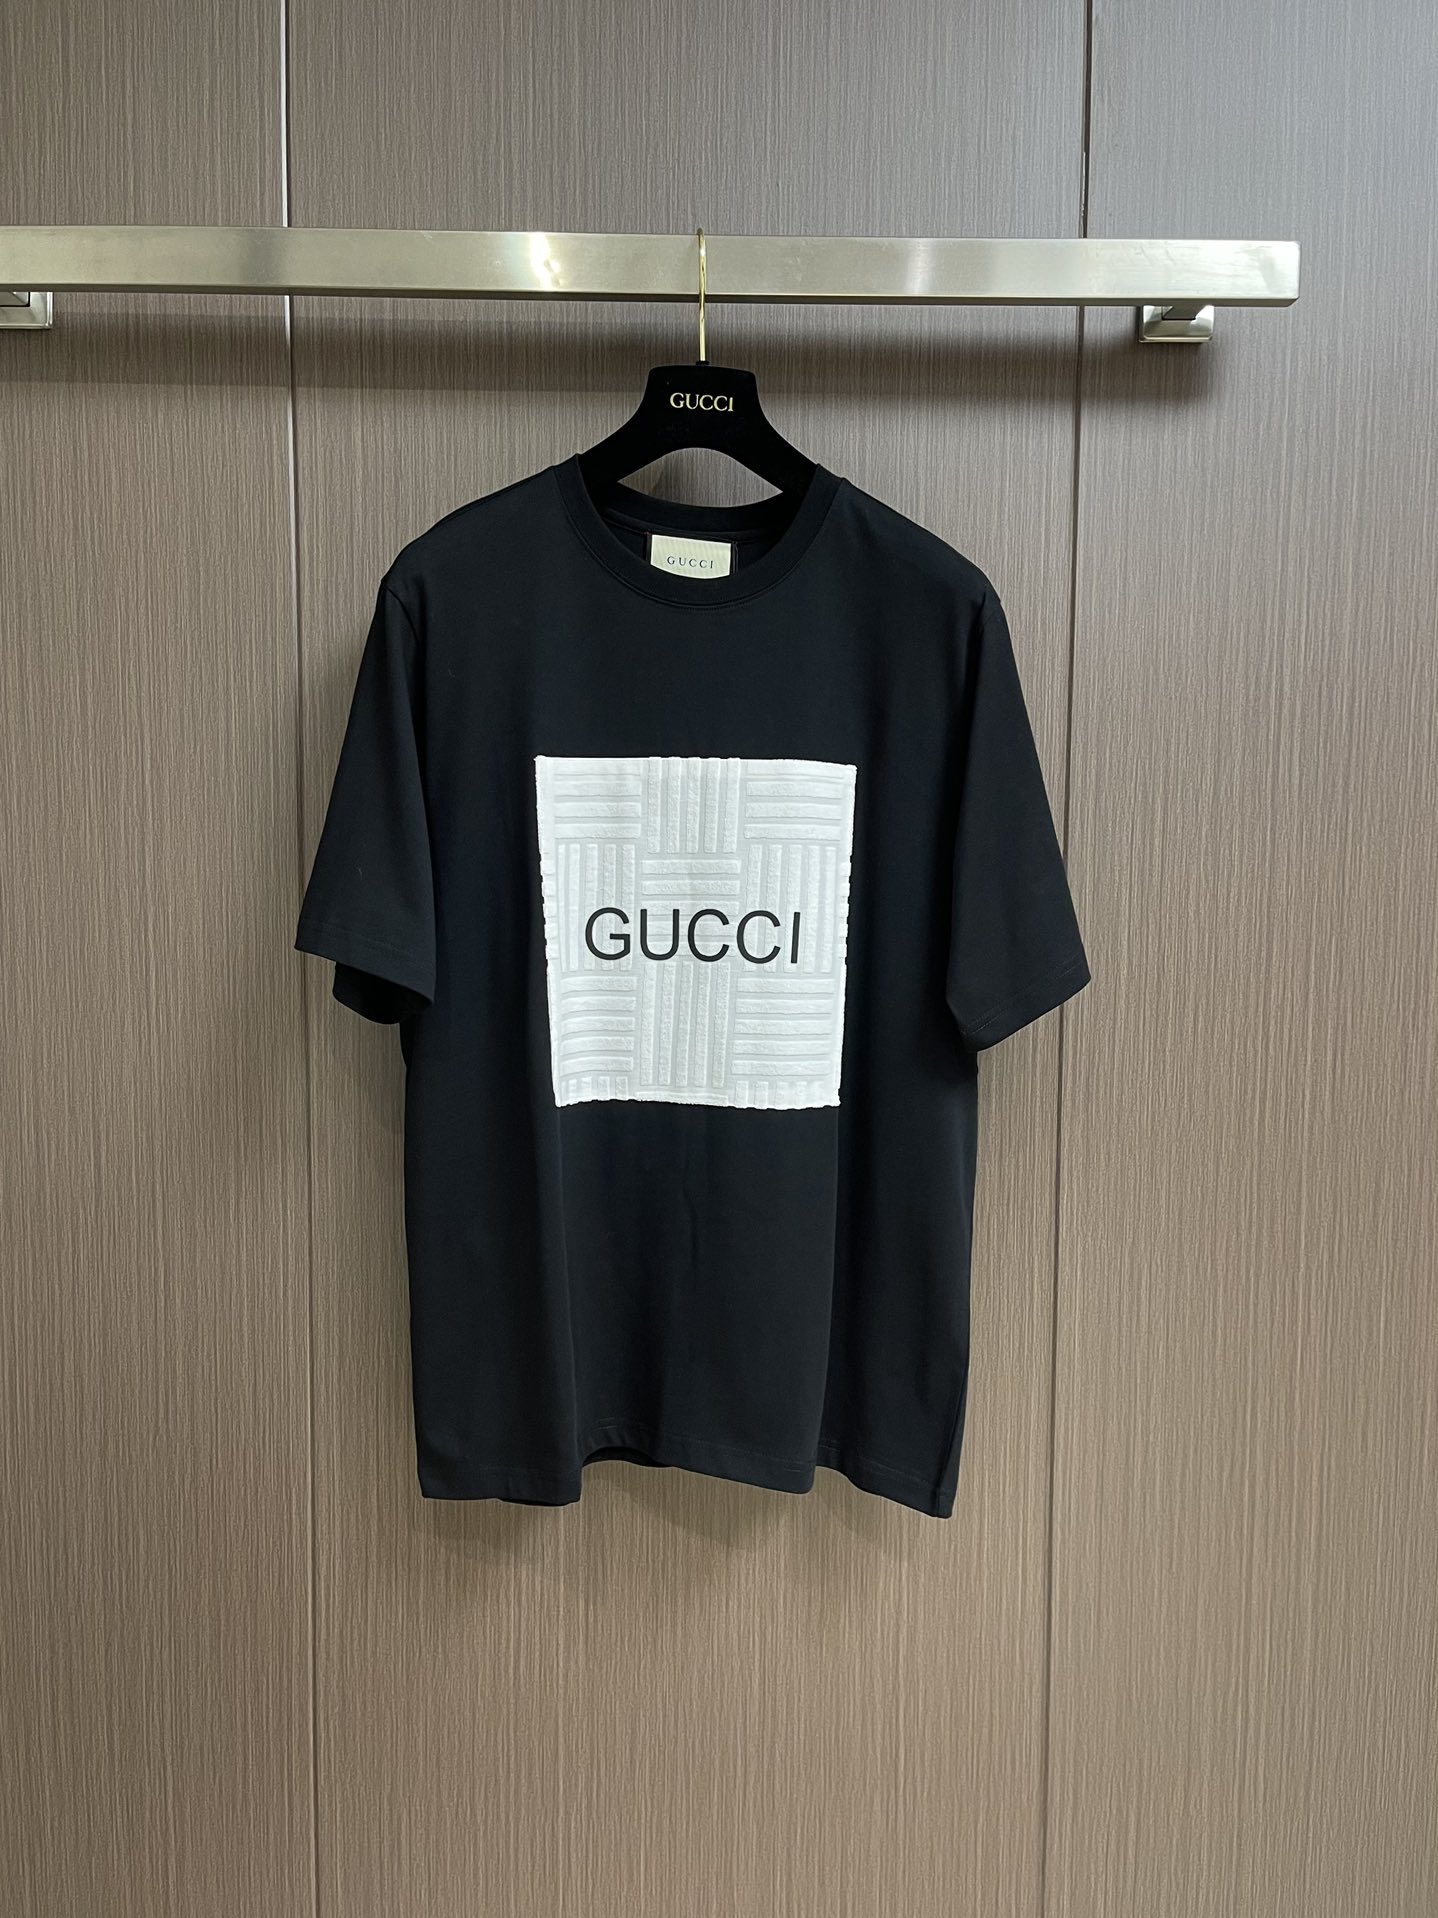 Gucci Clothing T-Shirt Buy Sell
 Printing Cotton Knitting Spring Collection Short Sleeve